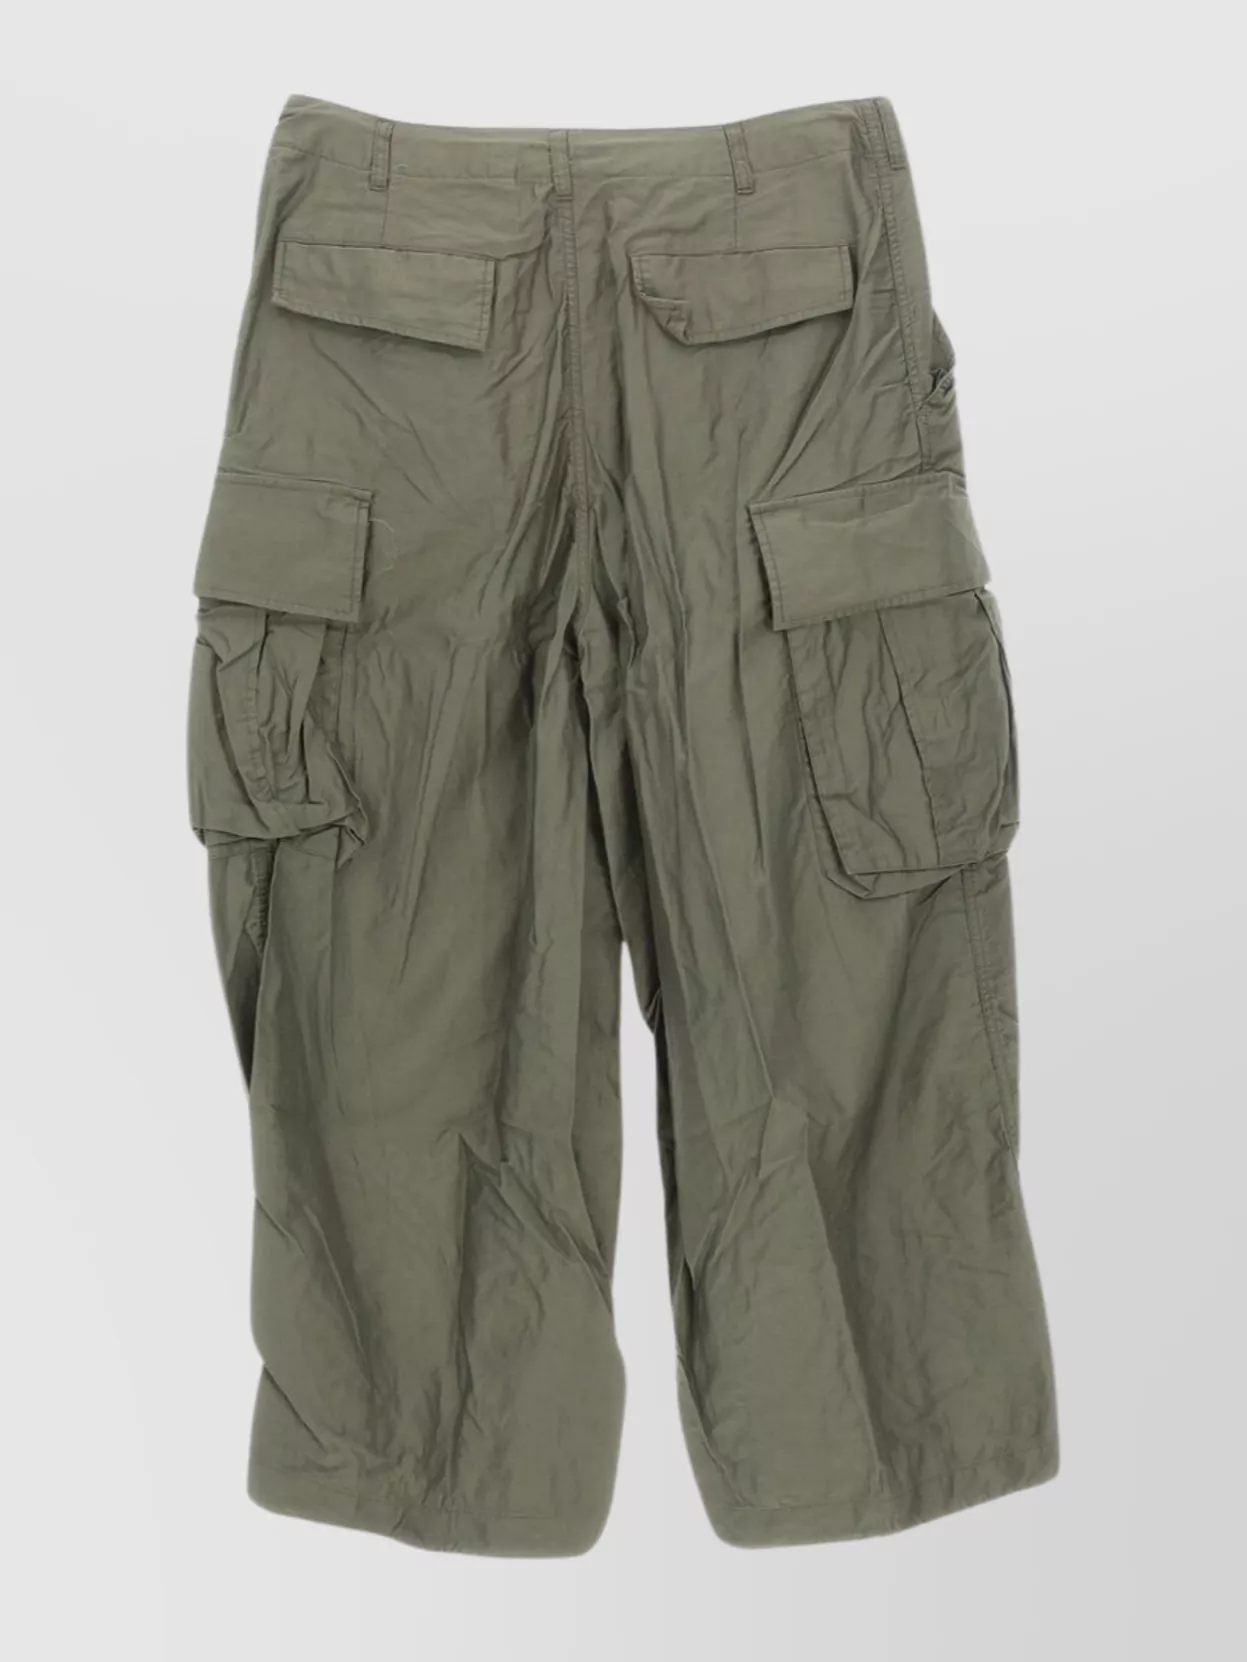 Needles Trousers With Adjustable Waist Drawstring